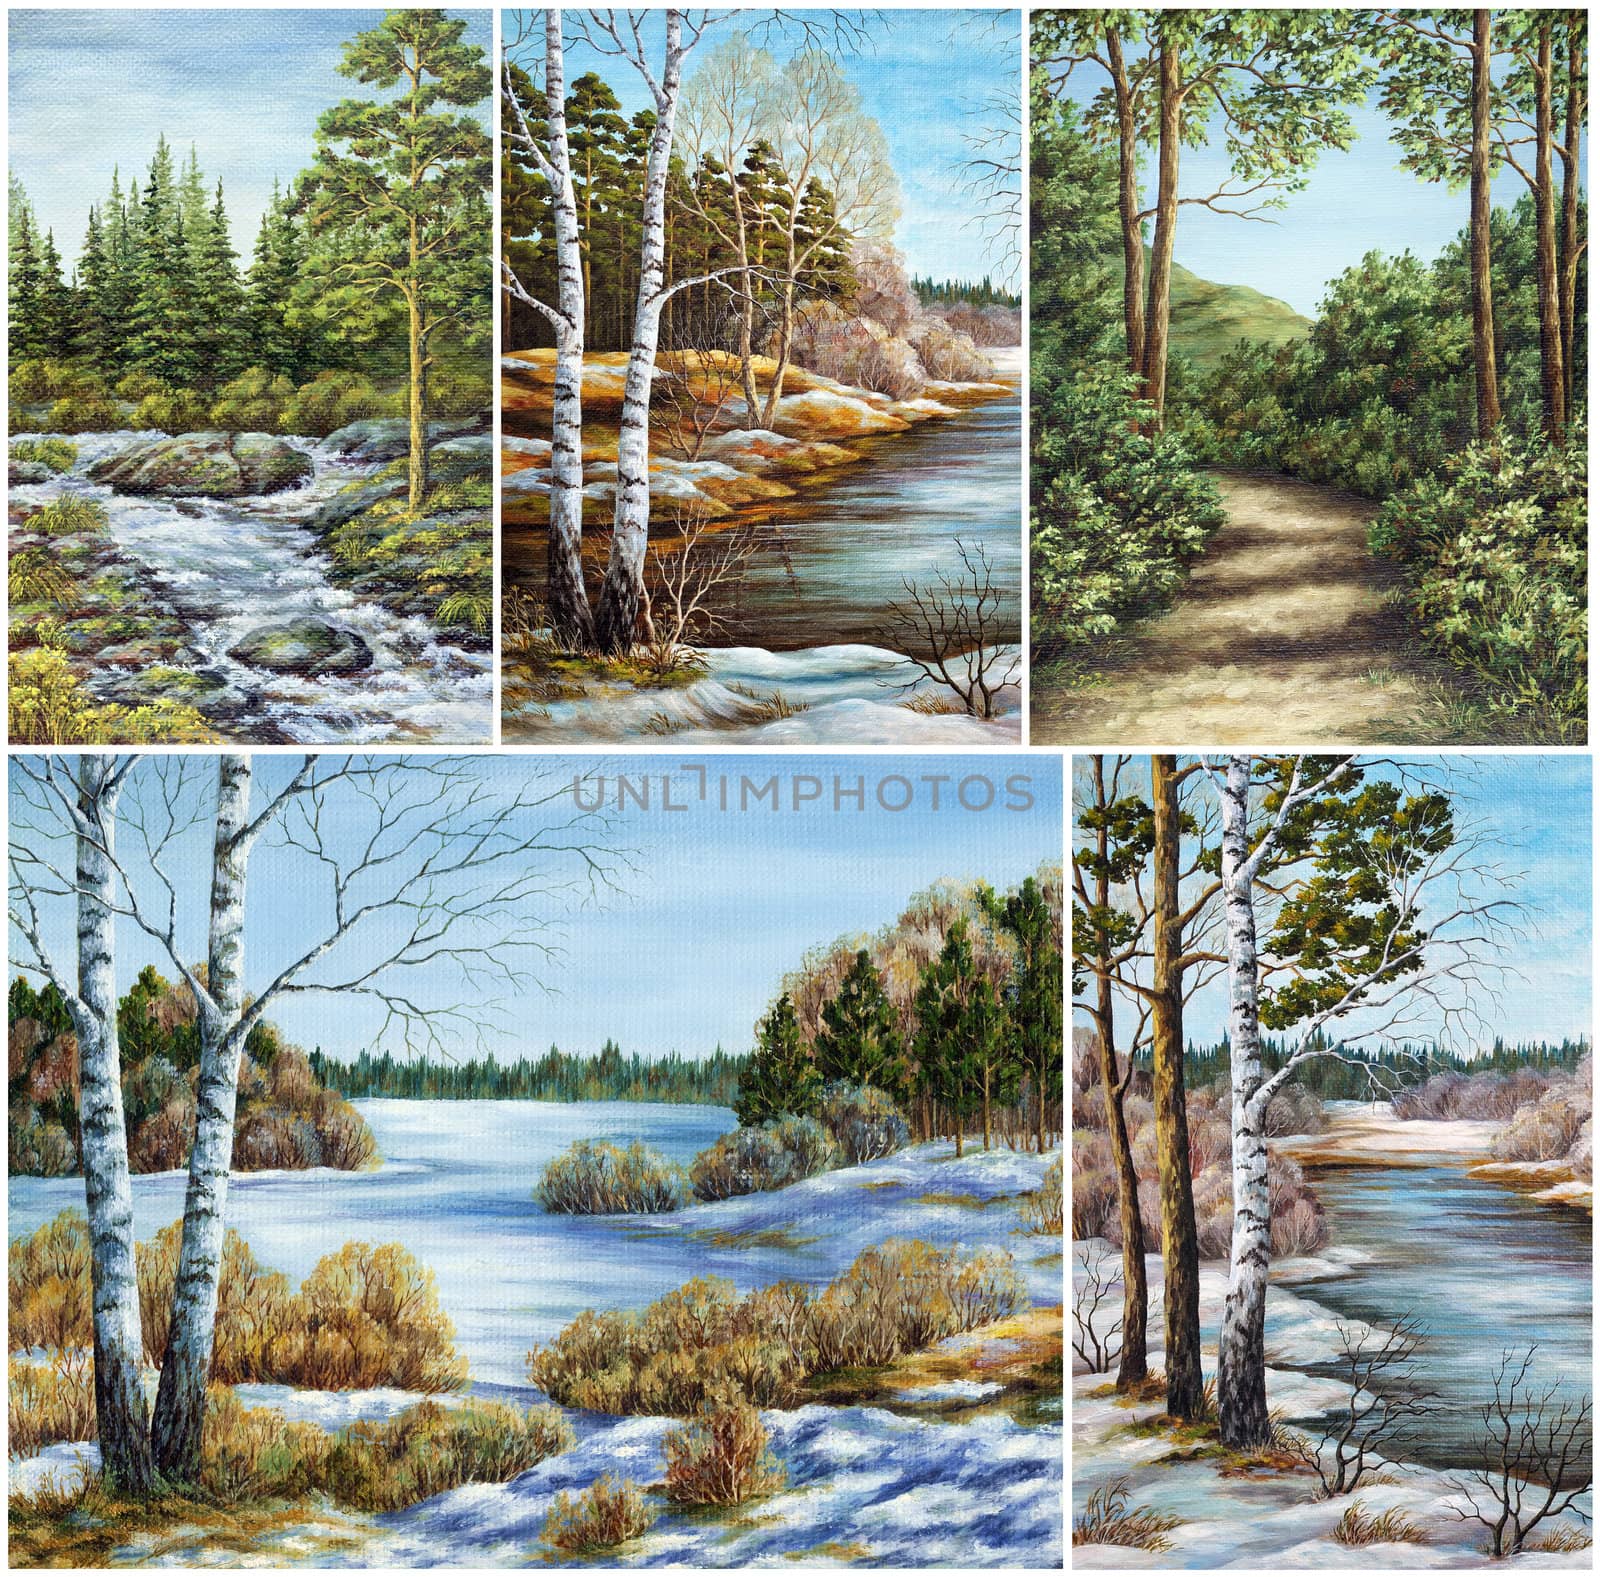 Set Siberian landscapes, Russia. Picture, hand-draw, oil paints on a canvas